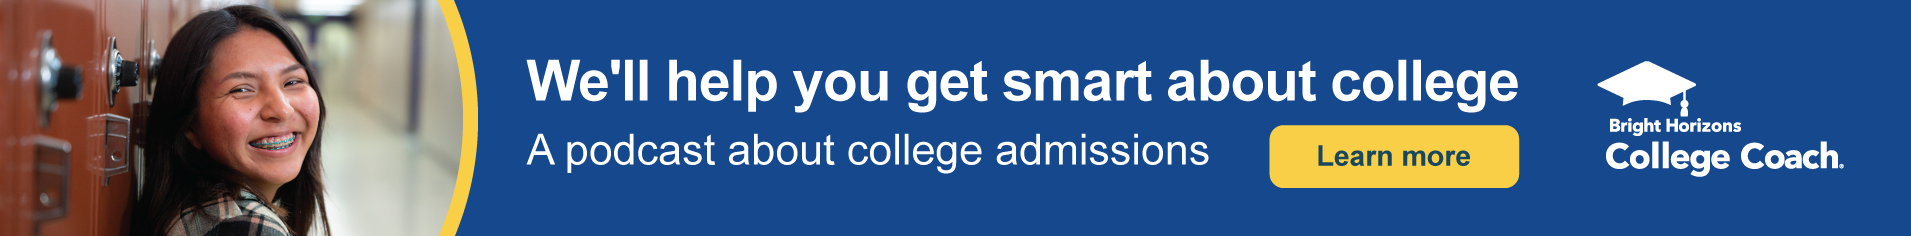 https://voiceamerica.com/shows/4203/be/College Coach - WLE Ad Banner 2.png